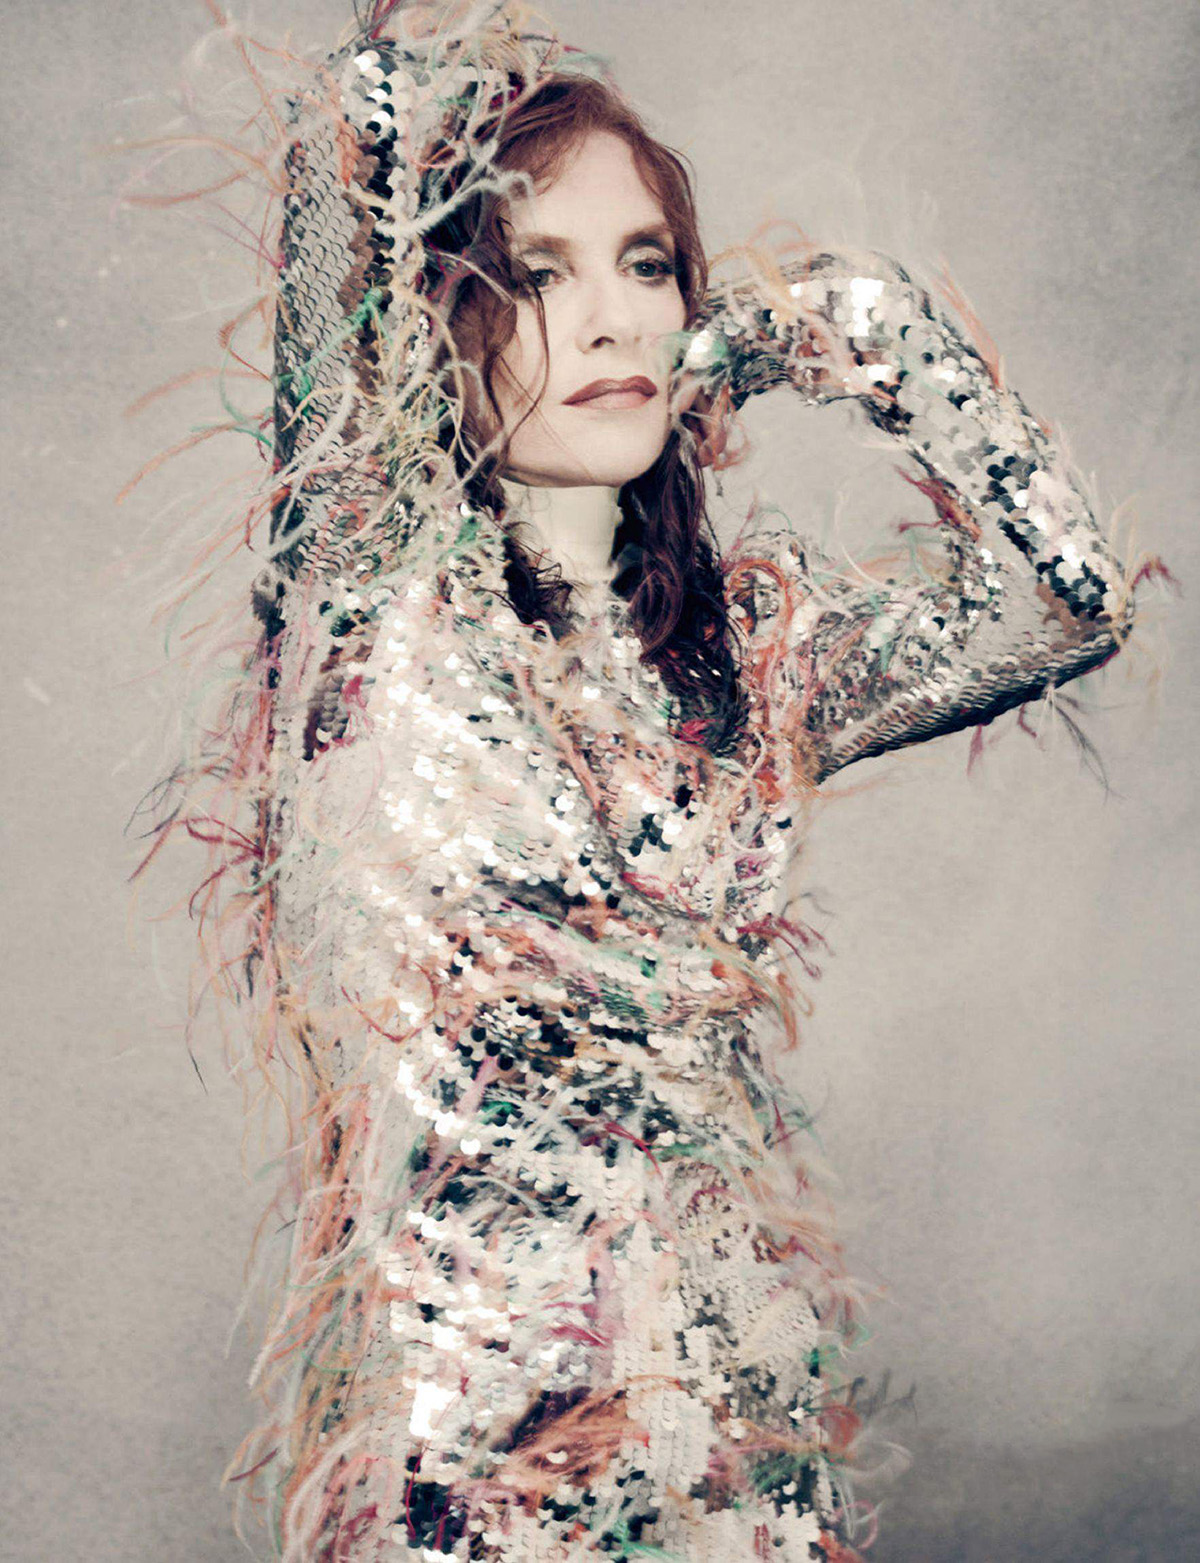 Isabelle Huppert covers Vogue France December 2021 January 2022 by Paolo Roversi